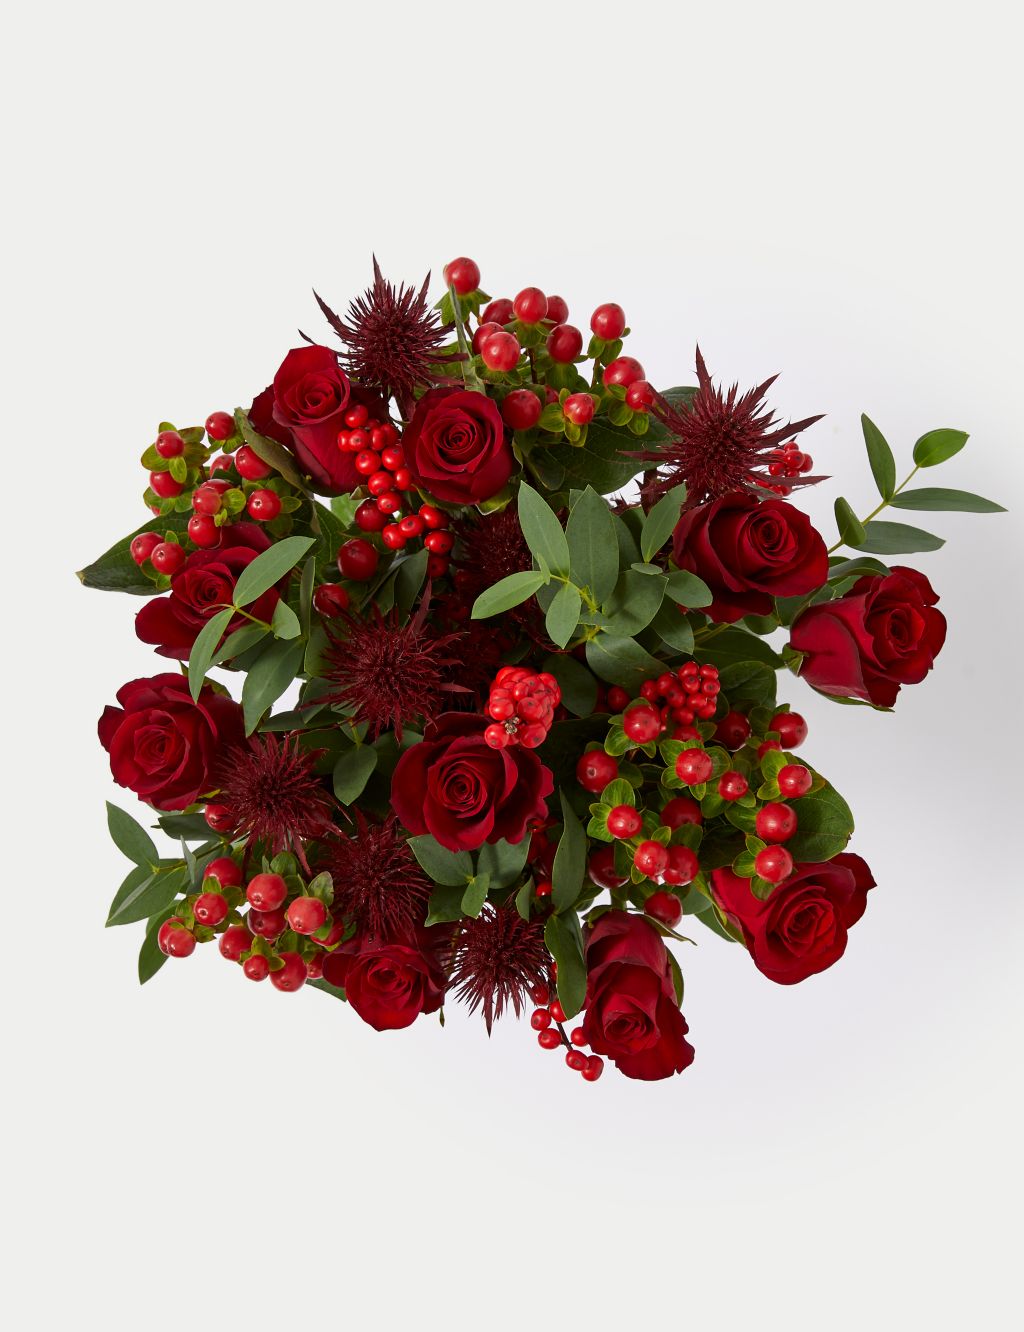 Festive Red Rose Bouquet in Vase